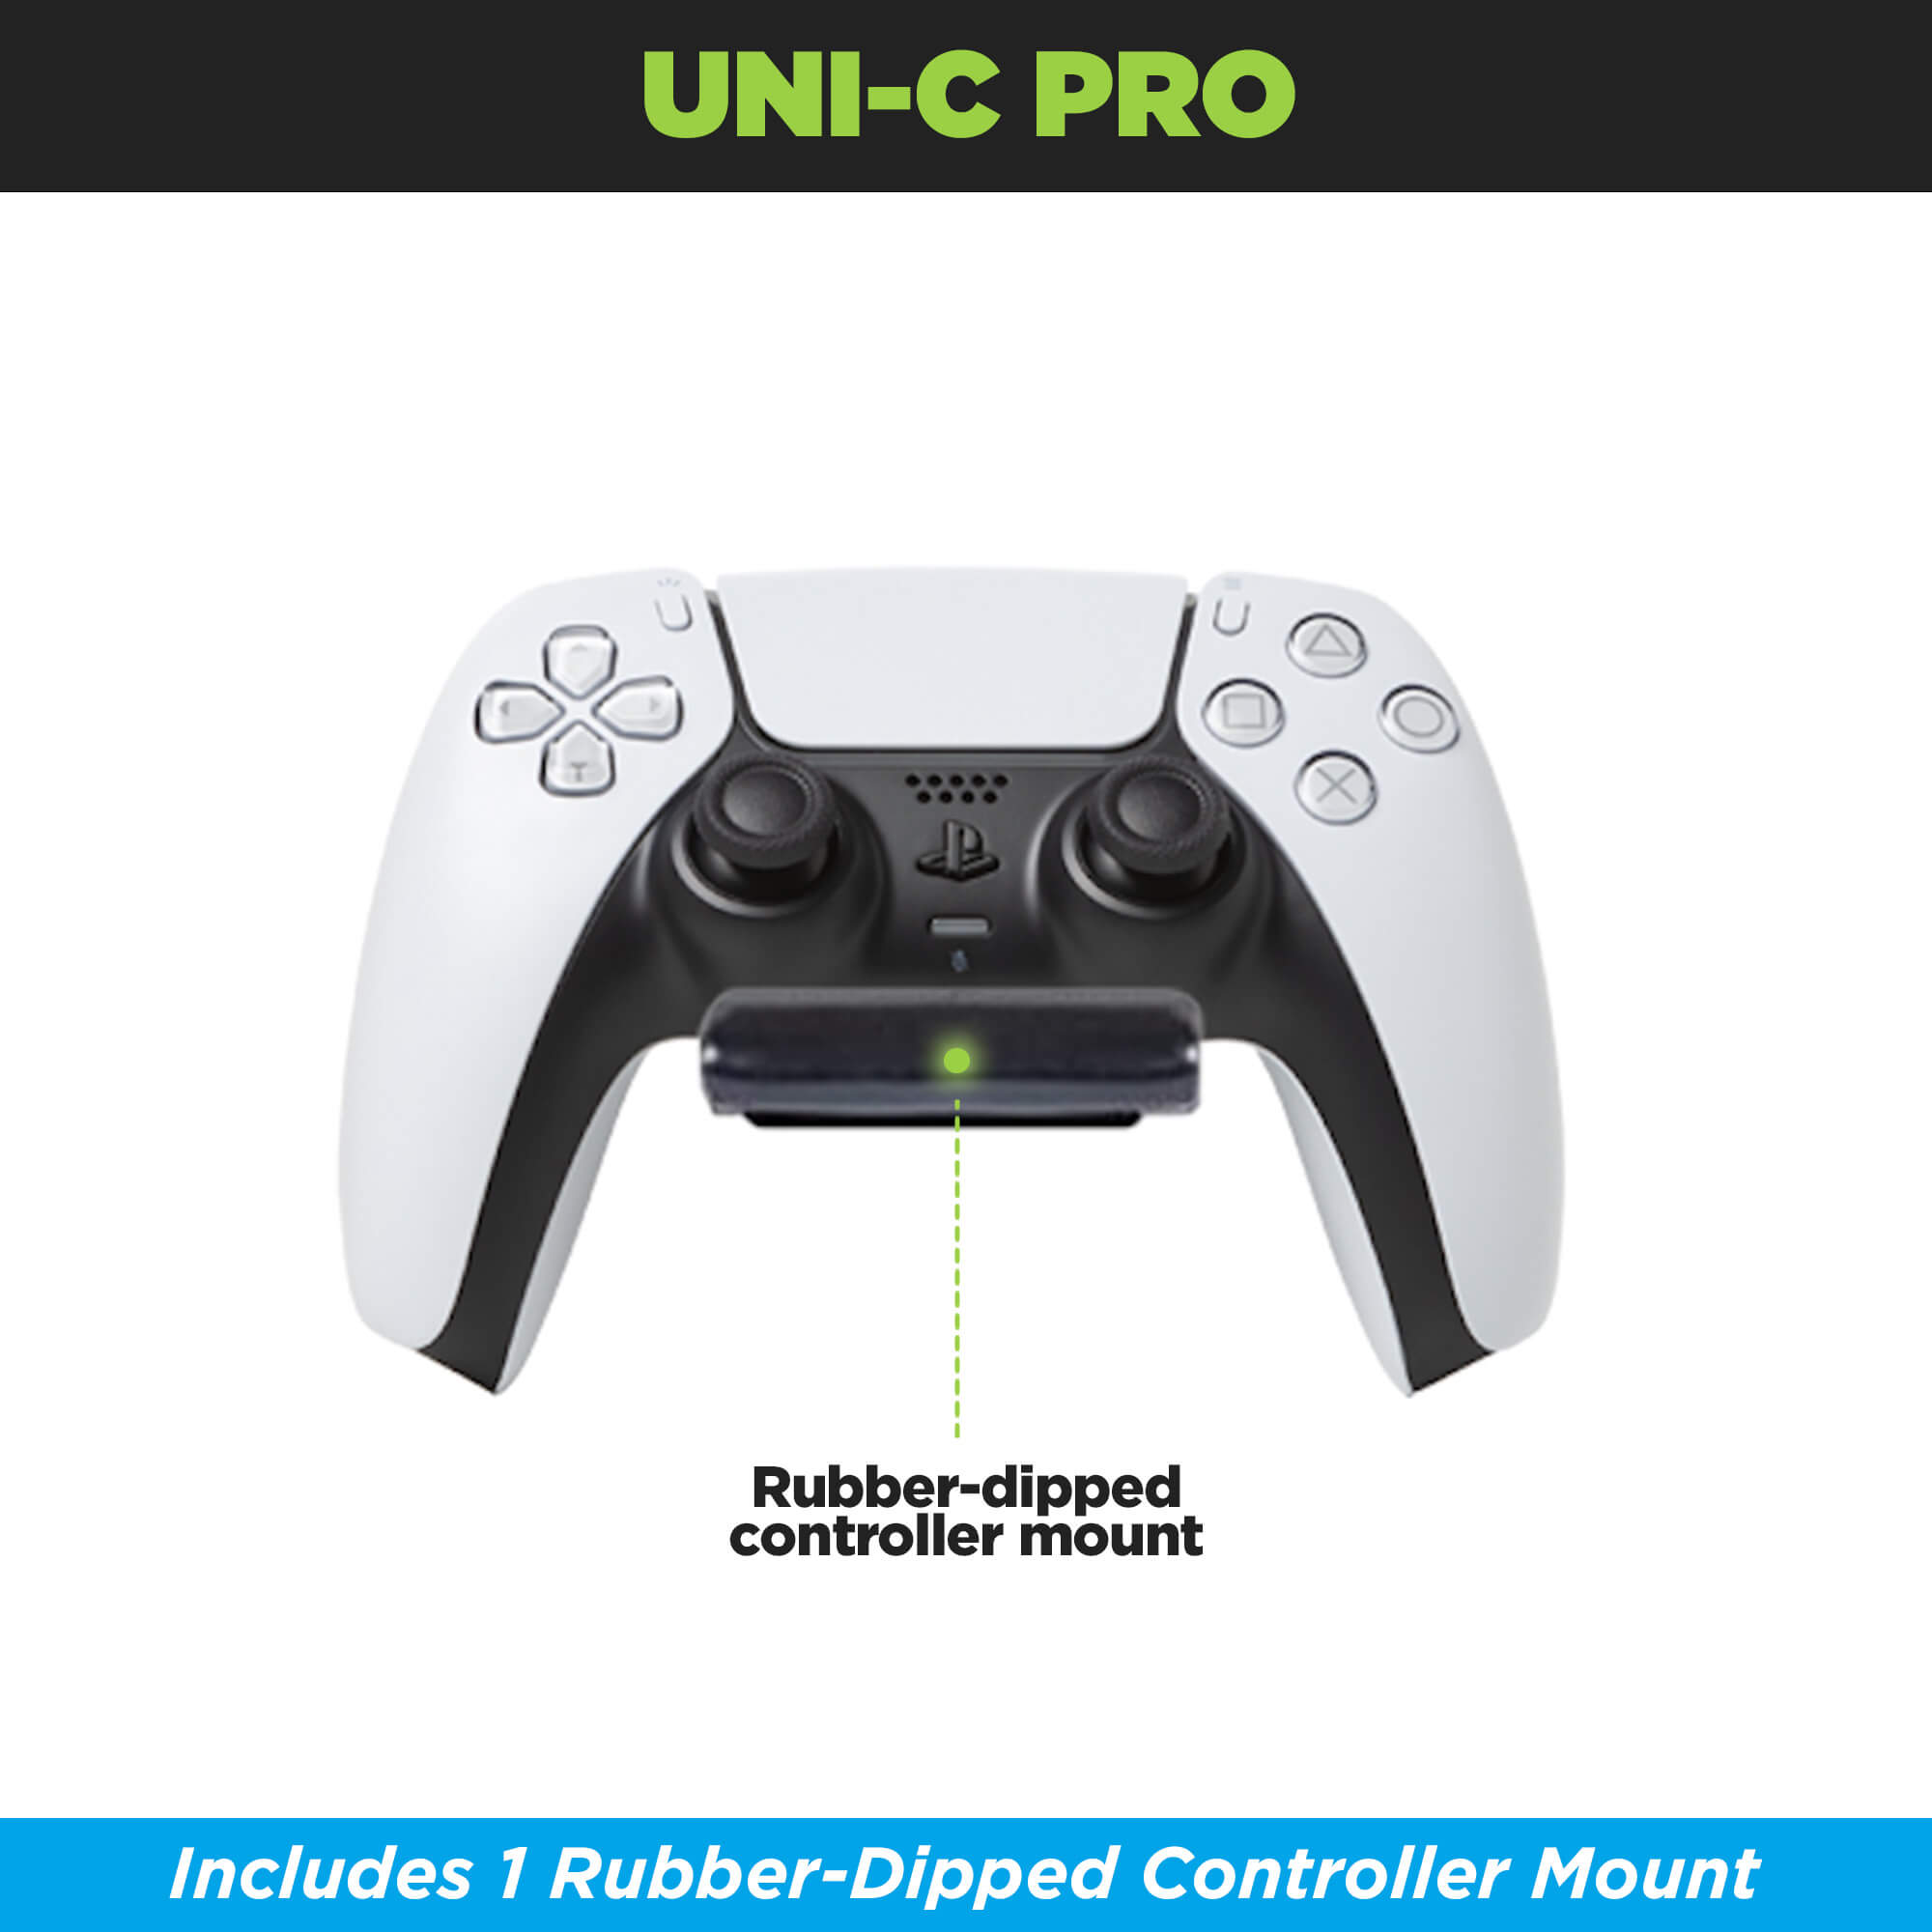 HIDEit Mounts rubber-dipped steel controller mount designed for anti-slip protection.